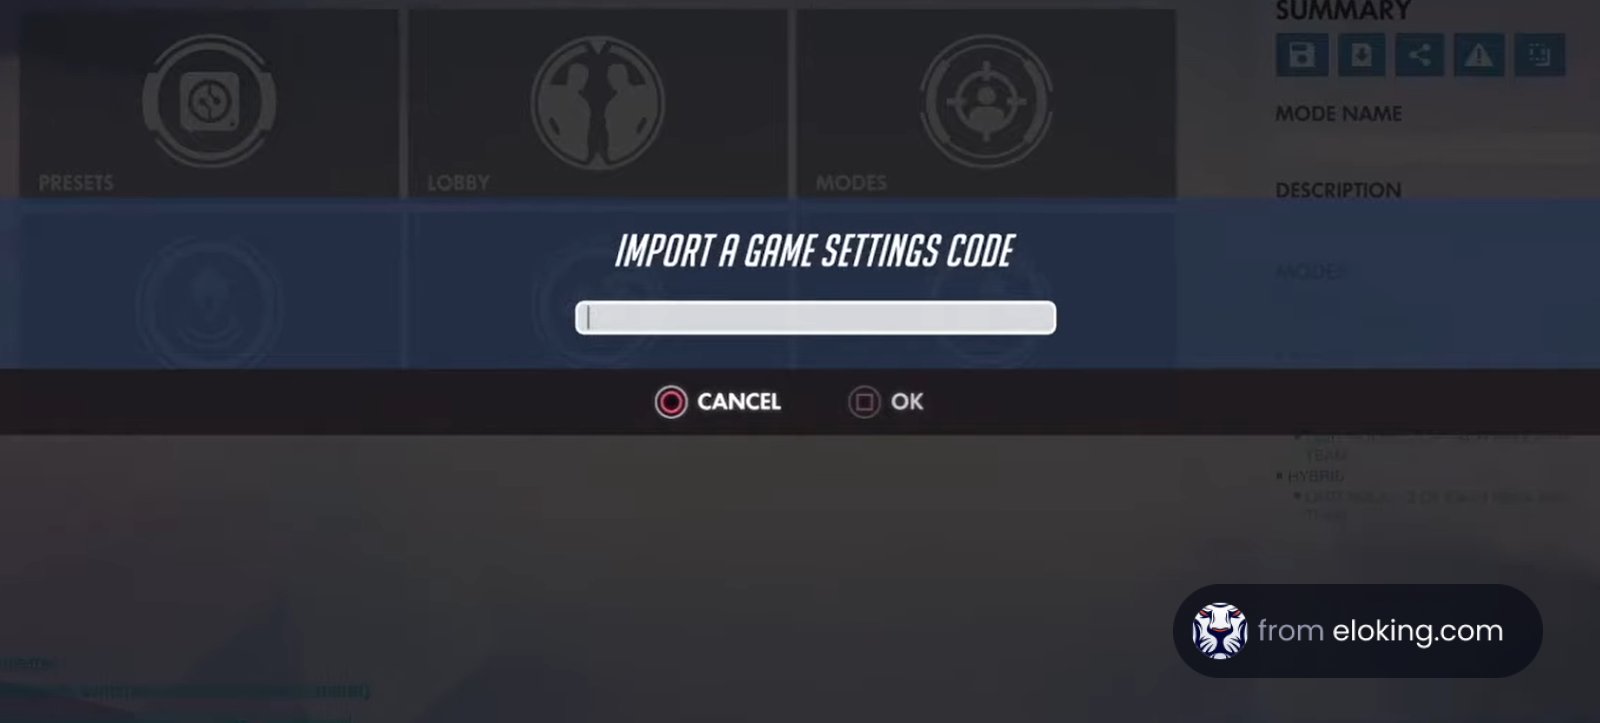 Screenshot of a game interface for importing settings code